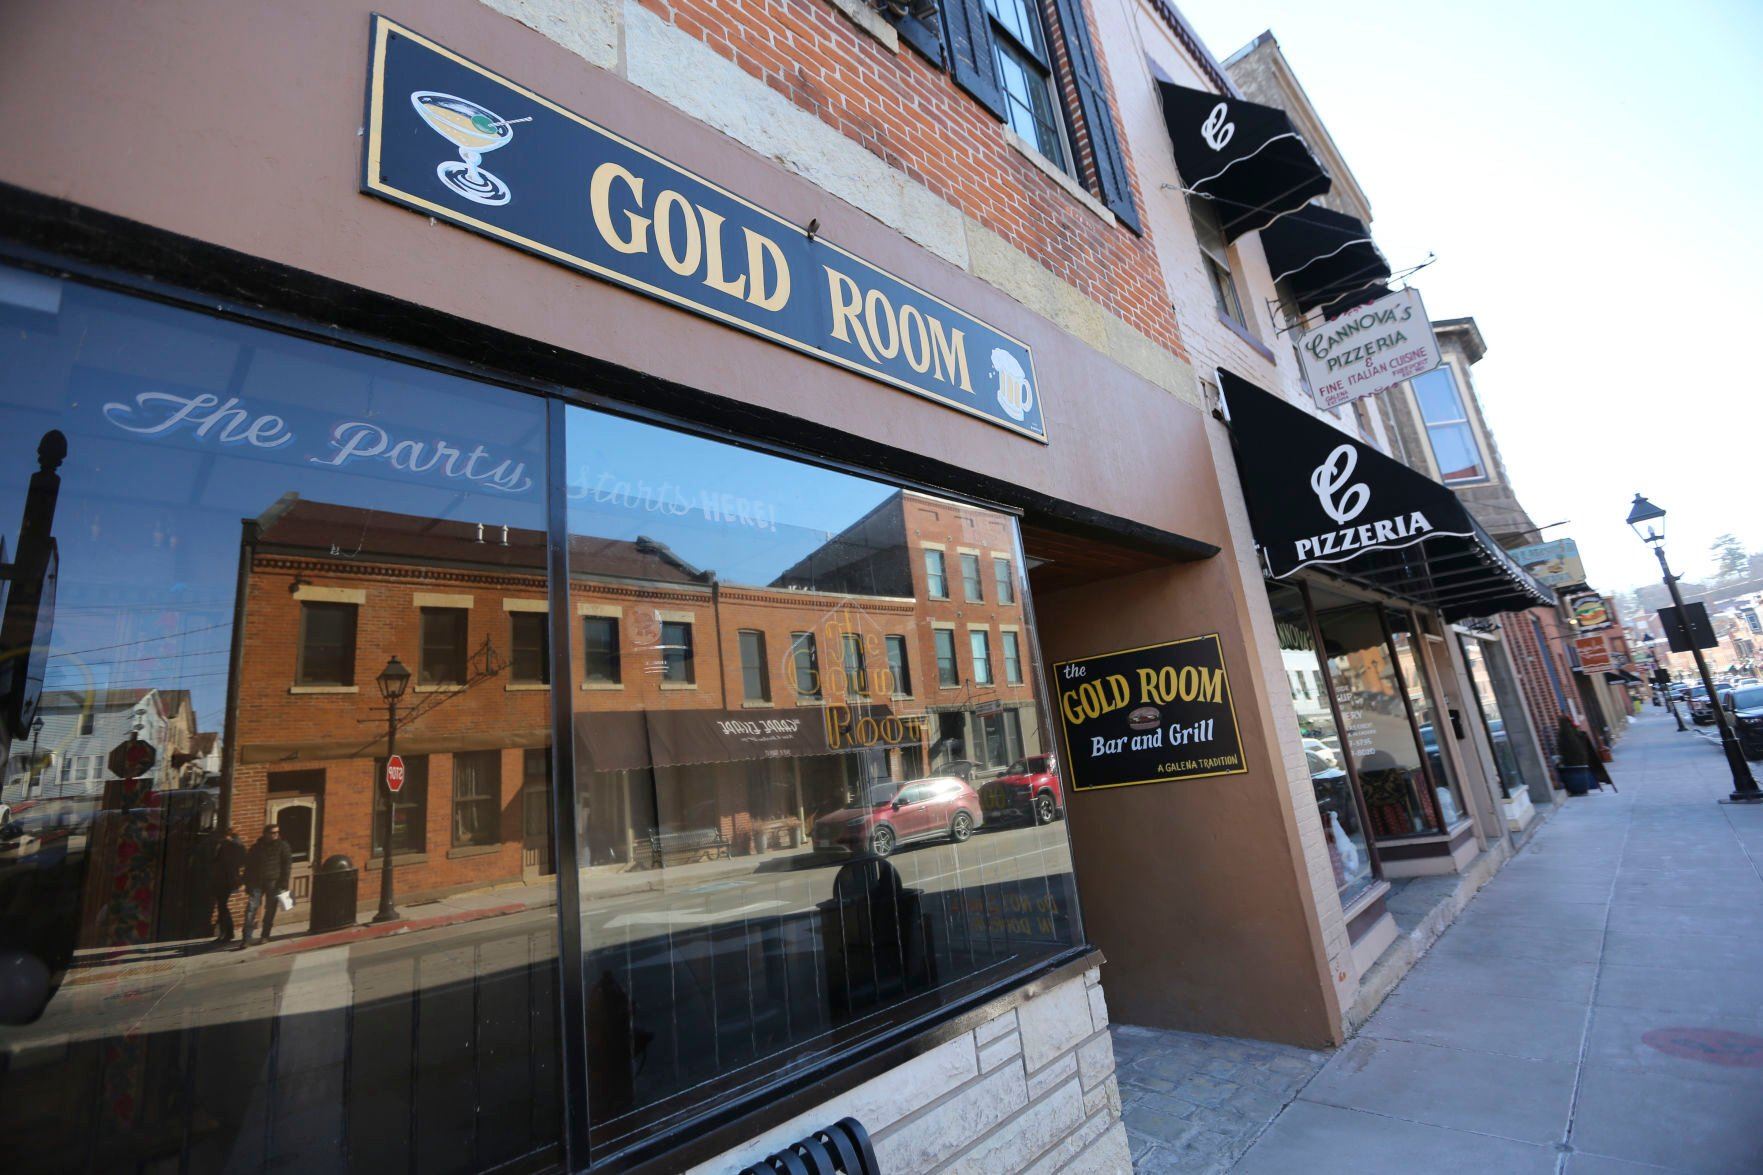 The Gold Room, in Galena, Ill., plans to reopen dine-in services in March.    PHOTO CREDIT: Dave Kettering